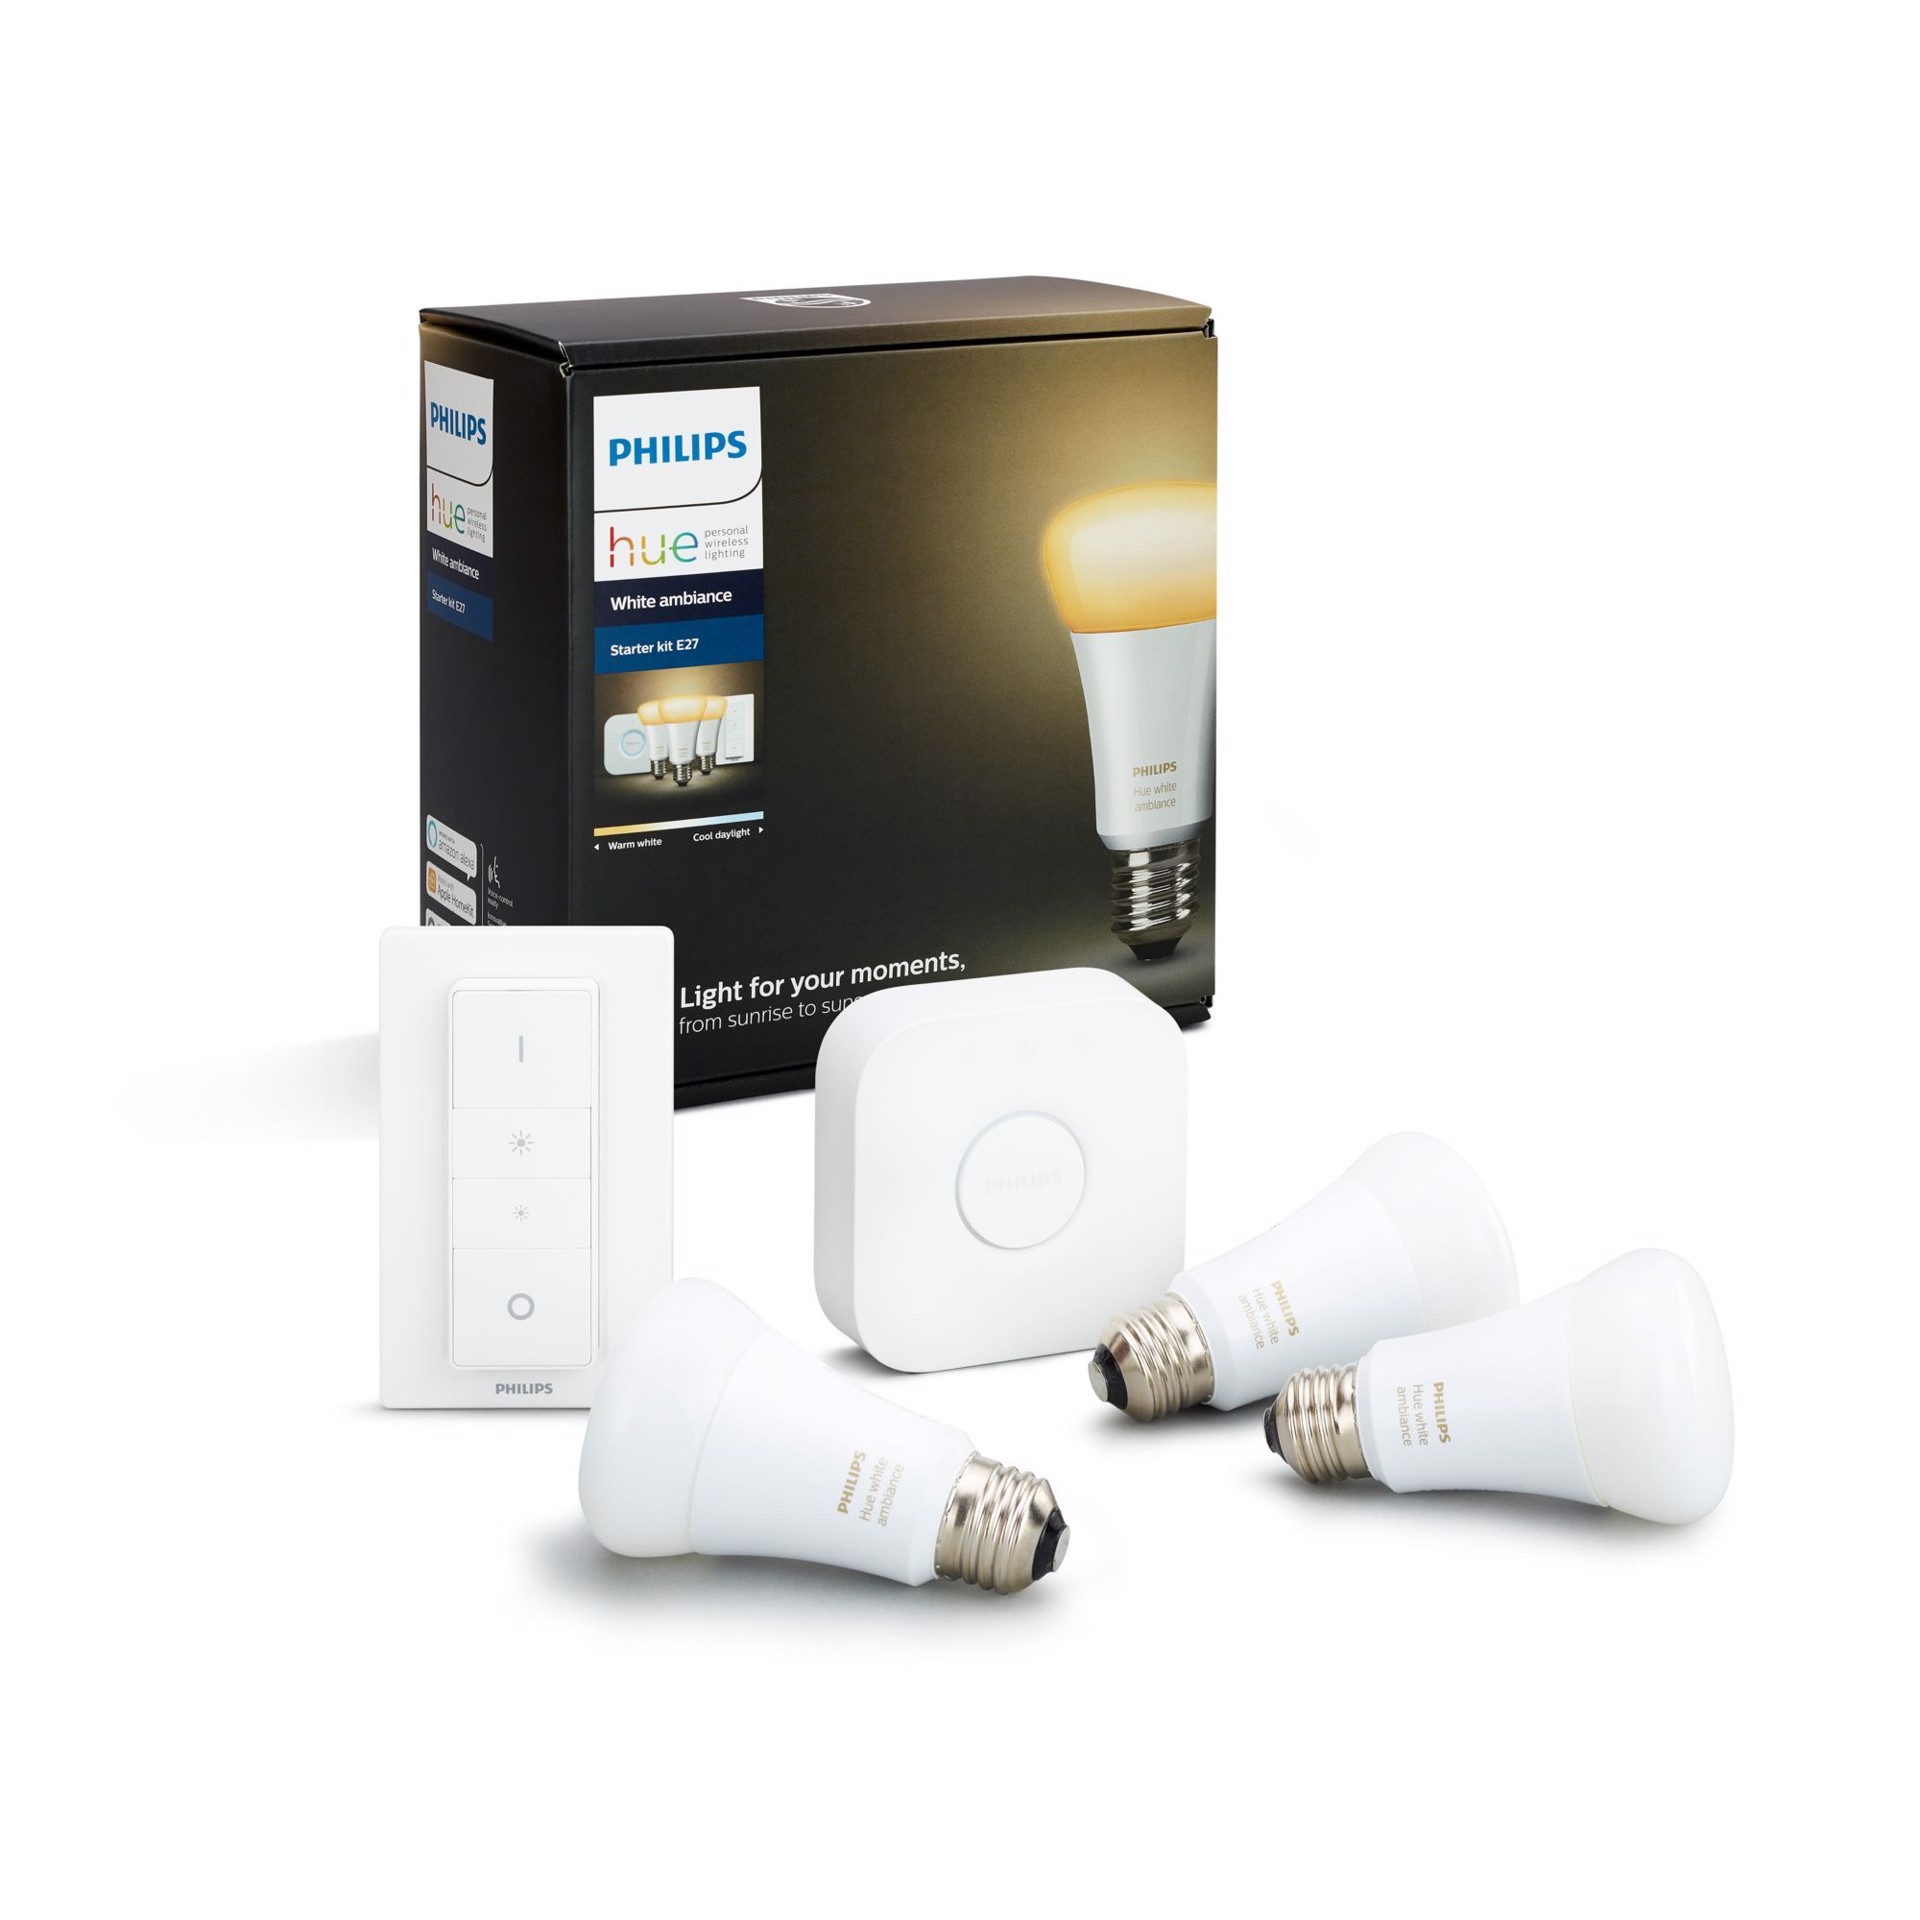 Philips by Signify Philips Hue White ambiance 3 x E27 bulb Starter kit E27, Domotica in Offerta su Stay On